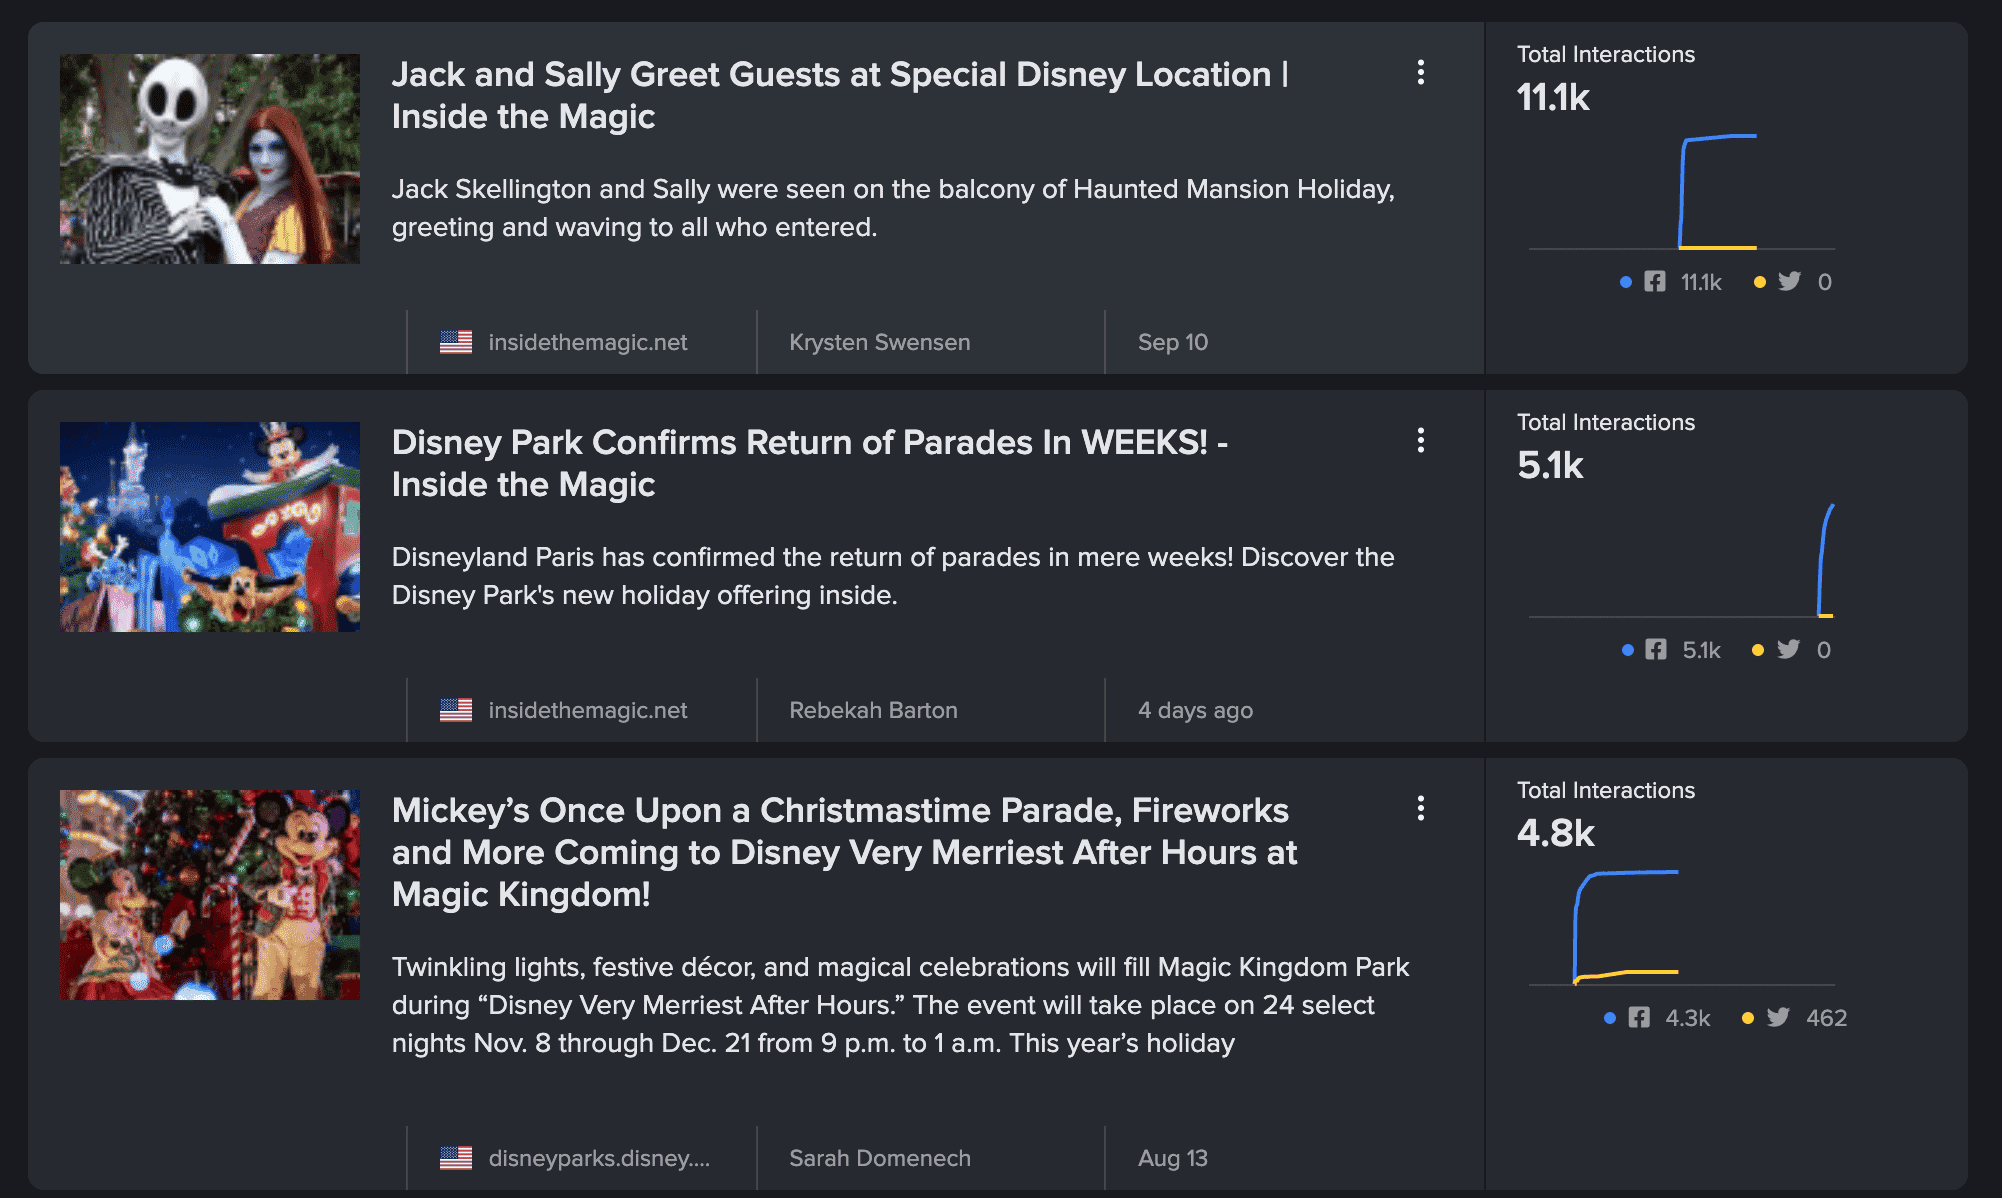 Screenshot of NewsWhip Spike showing the most engaged stories about Disney vacations